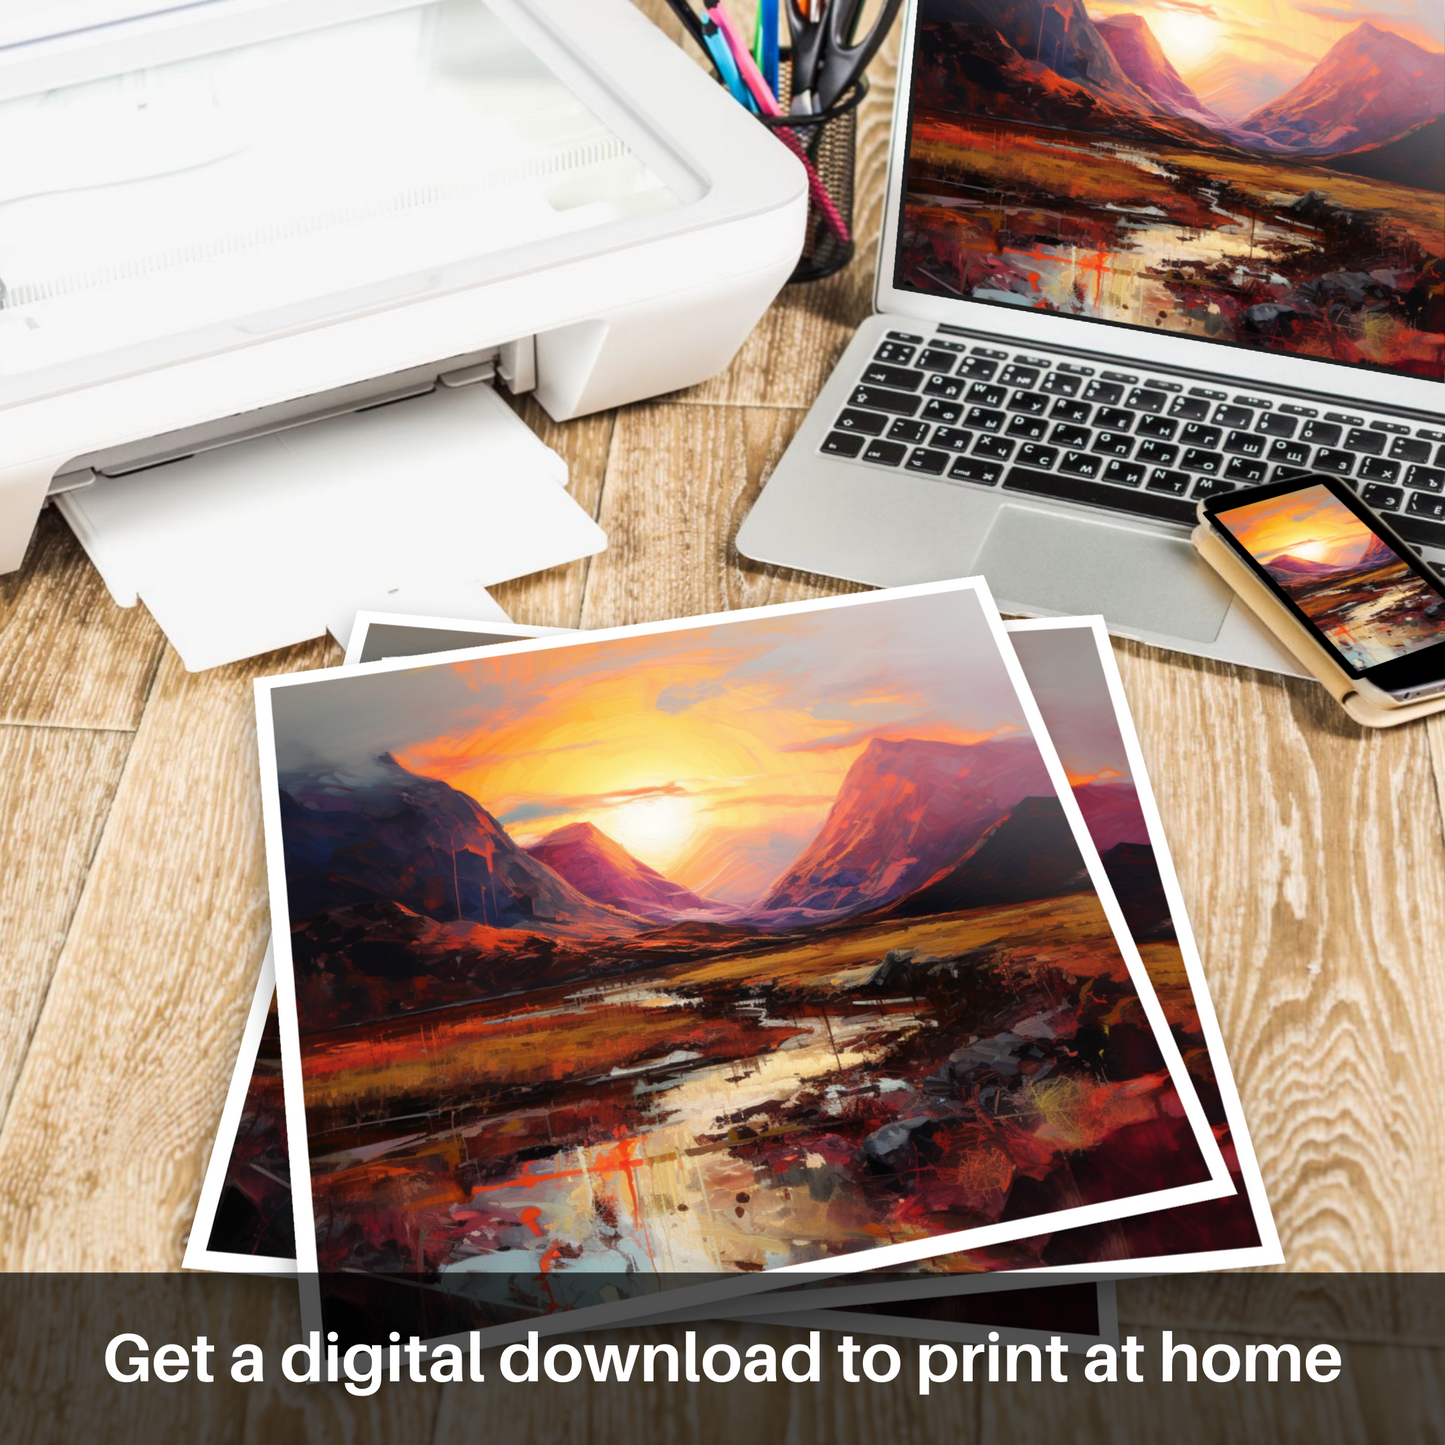 Downloadable and printable picture of Sunset glow in Glencoe